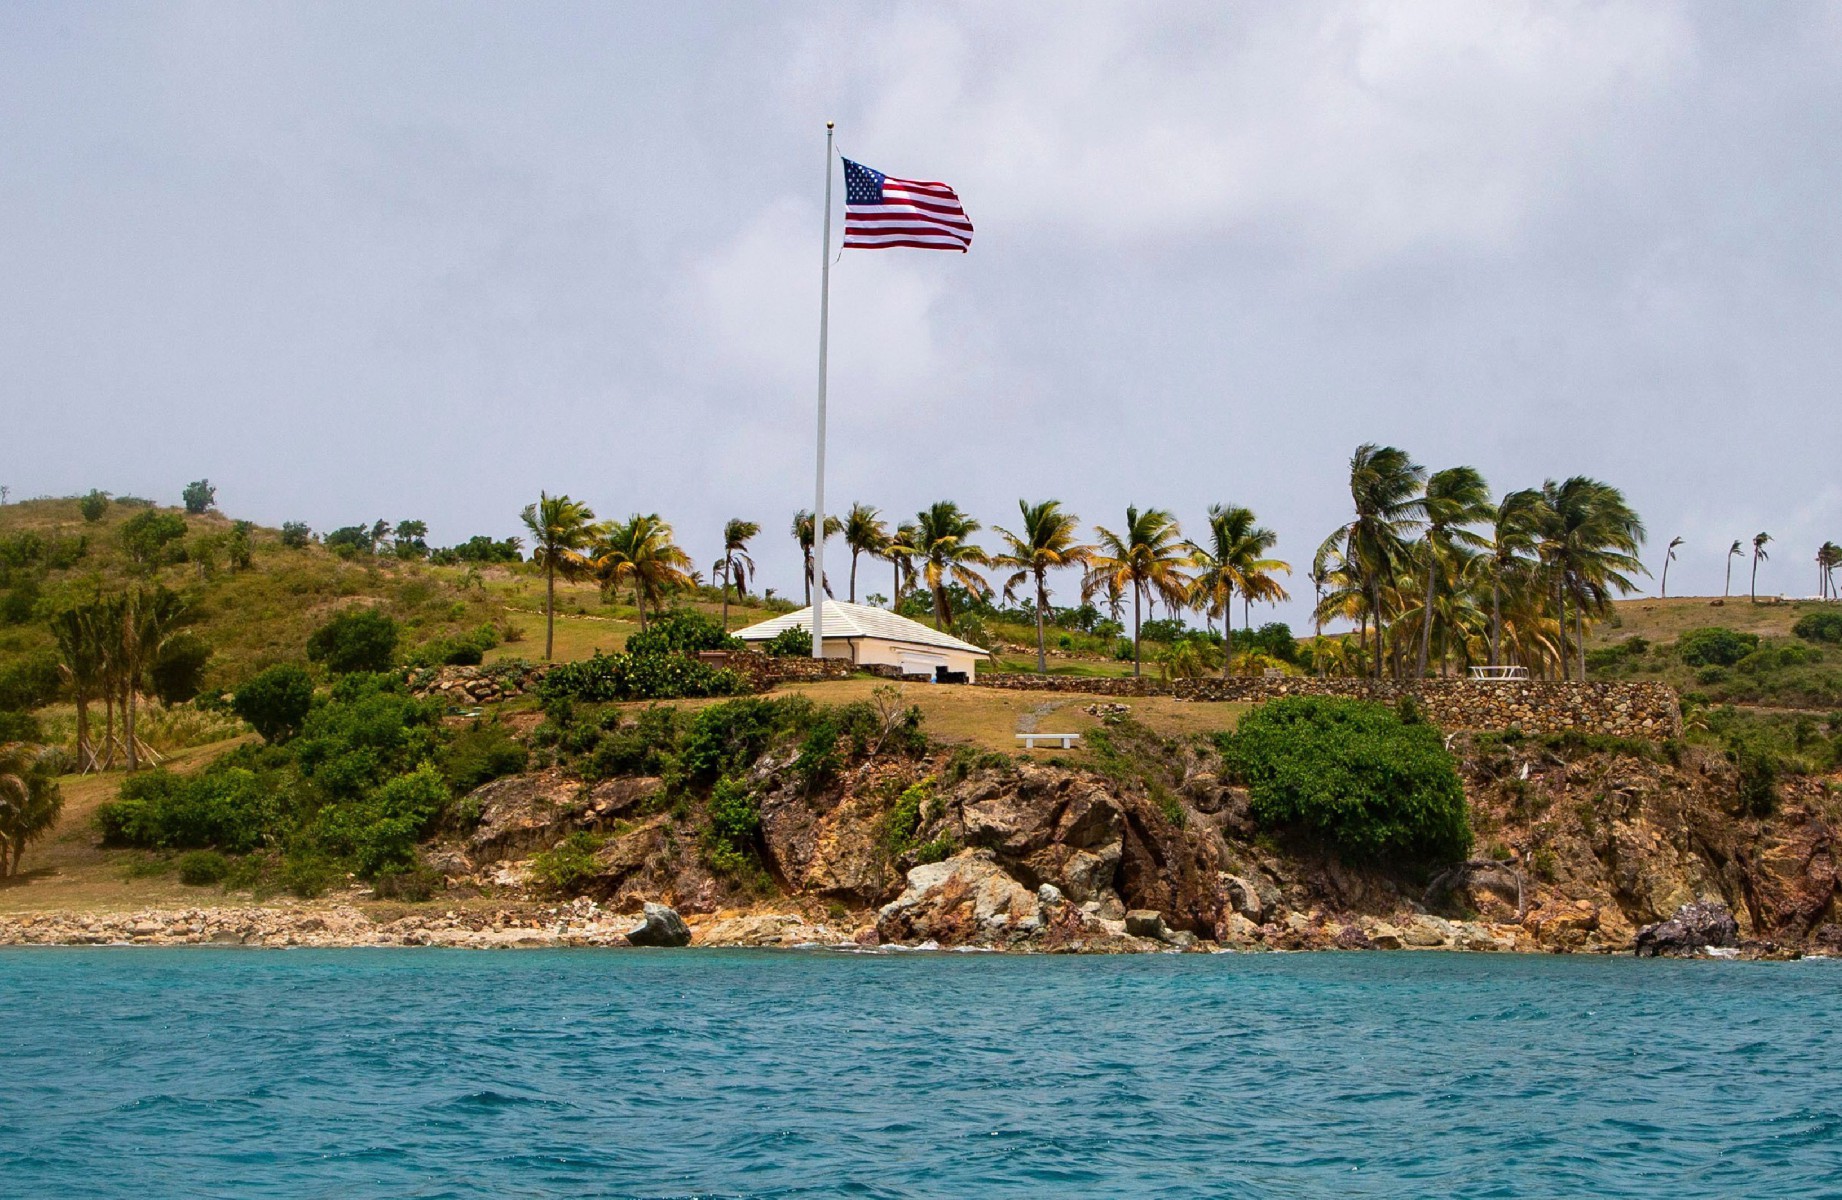 Epstein bought Little St James Island, in the US Virgin Islands as a private sanctuary